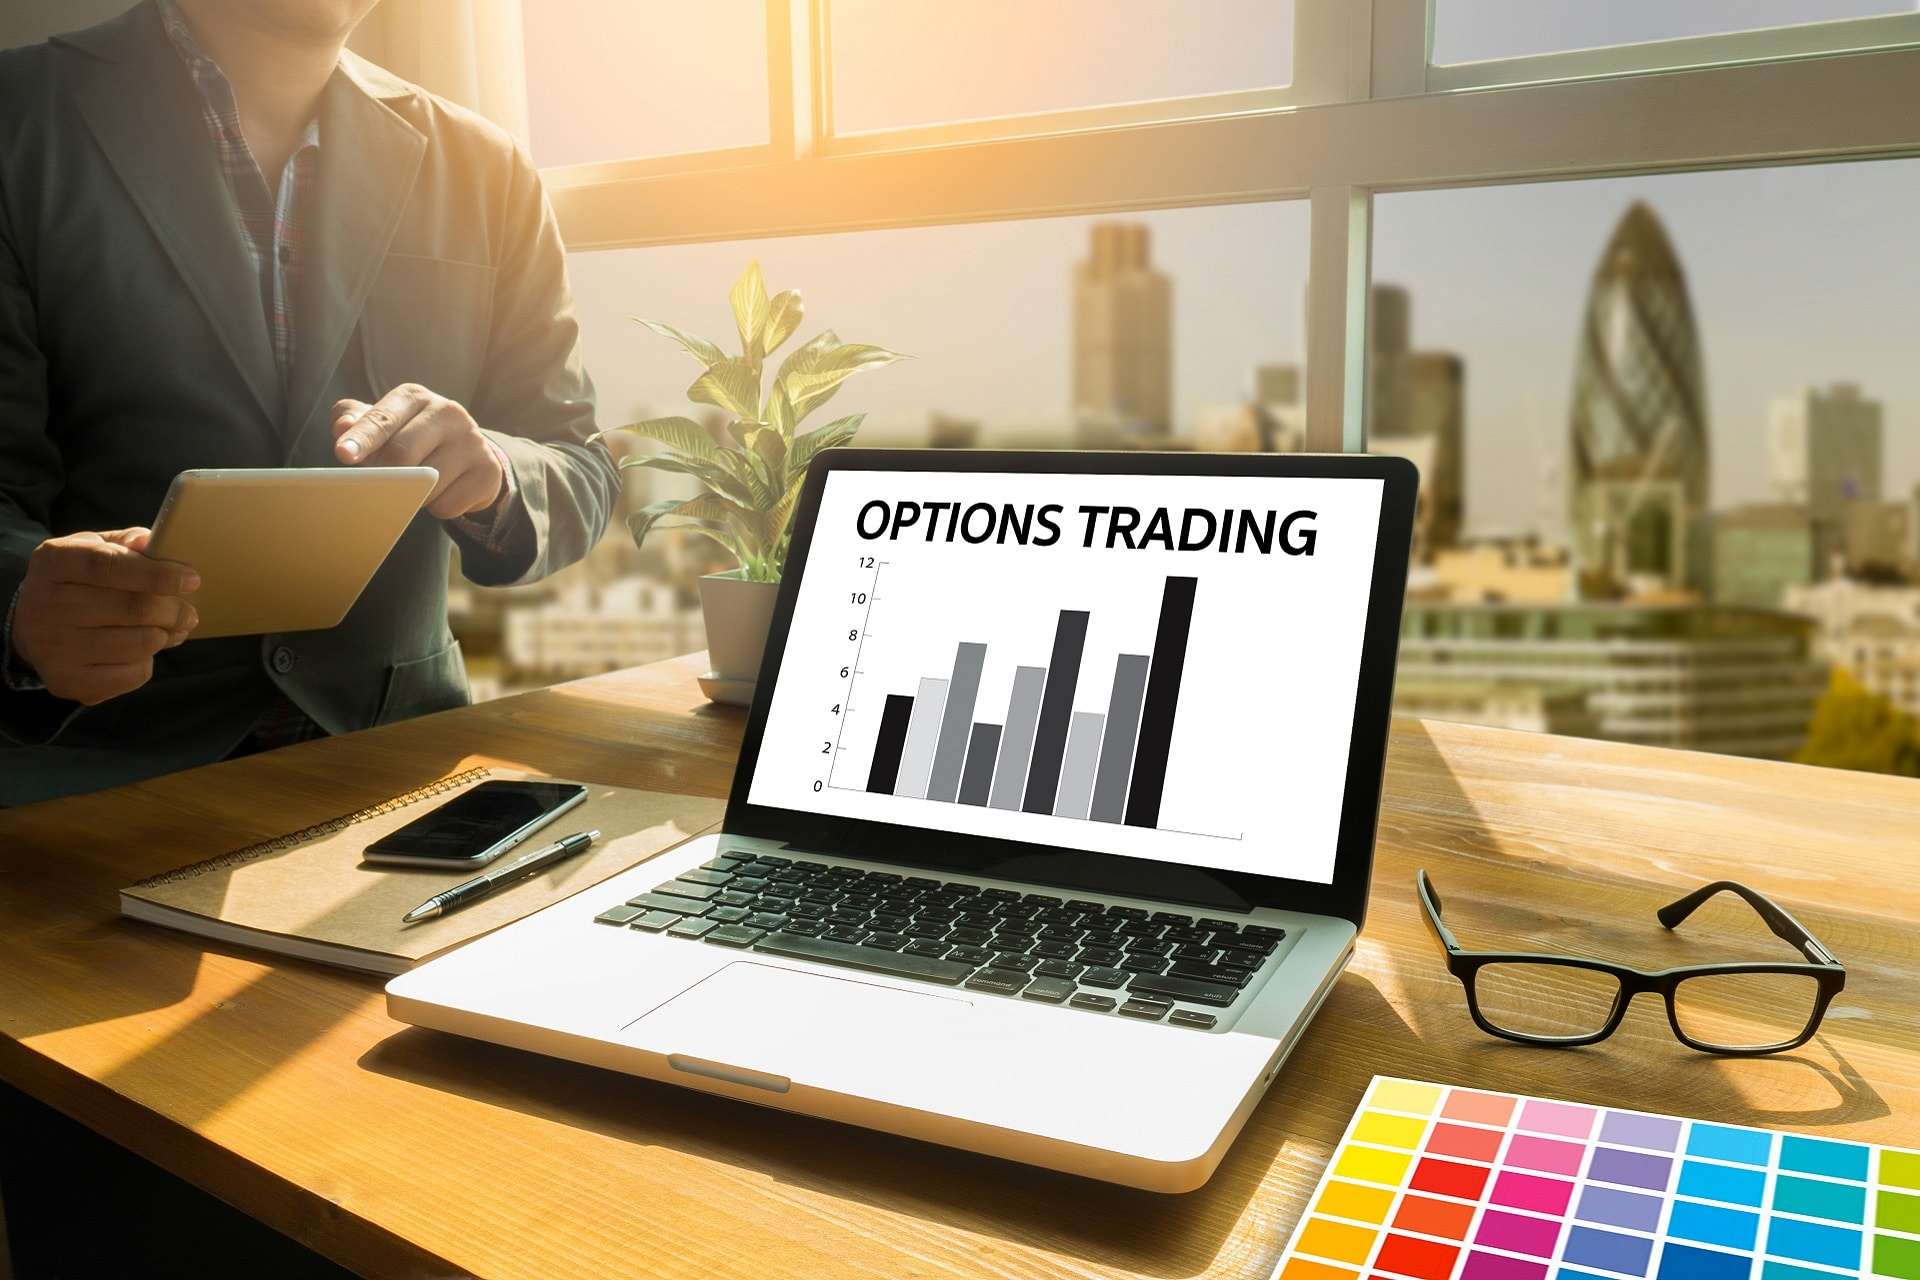 What should every options trader know before trading listed options?